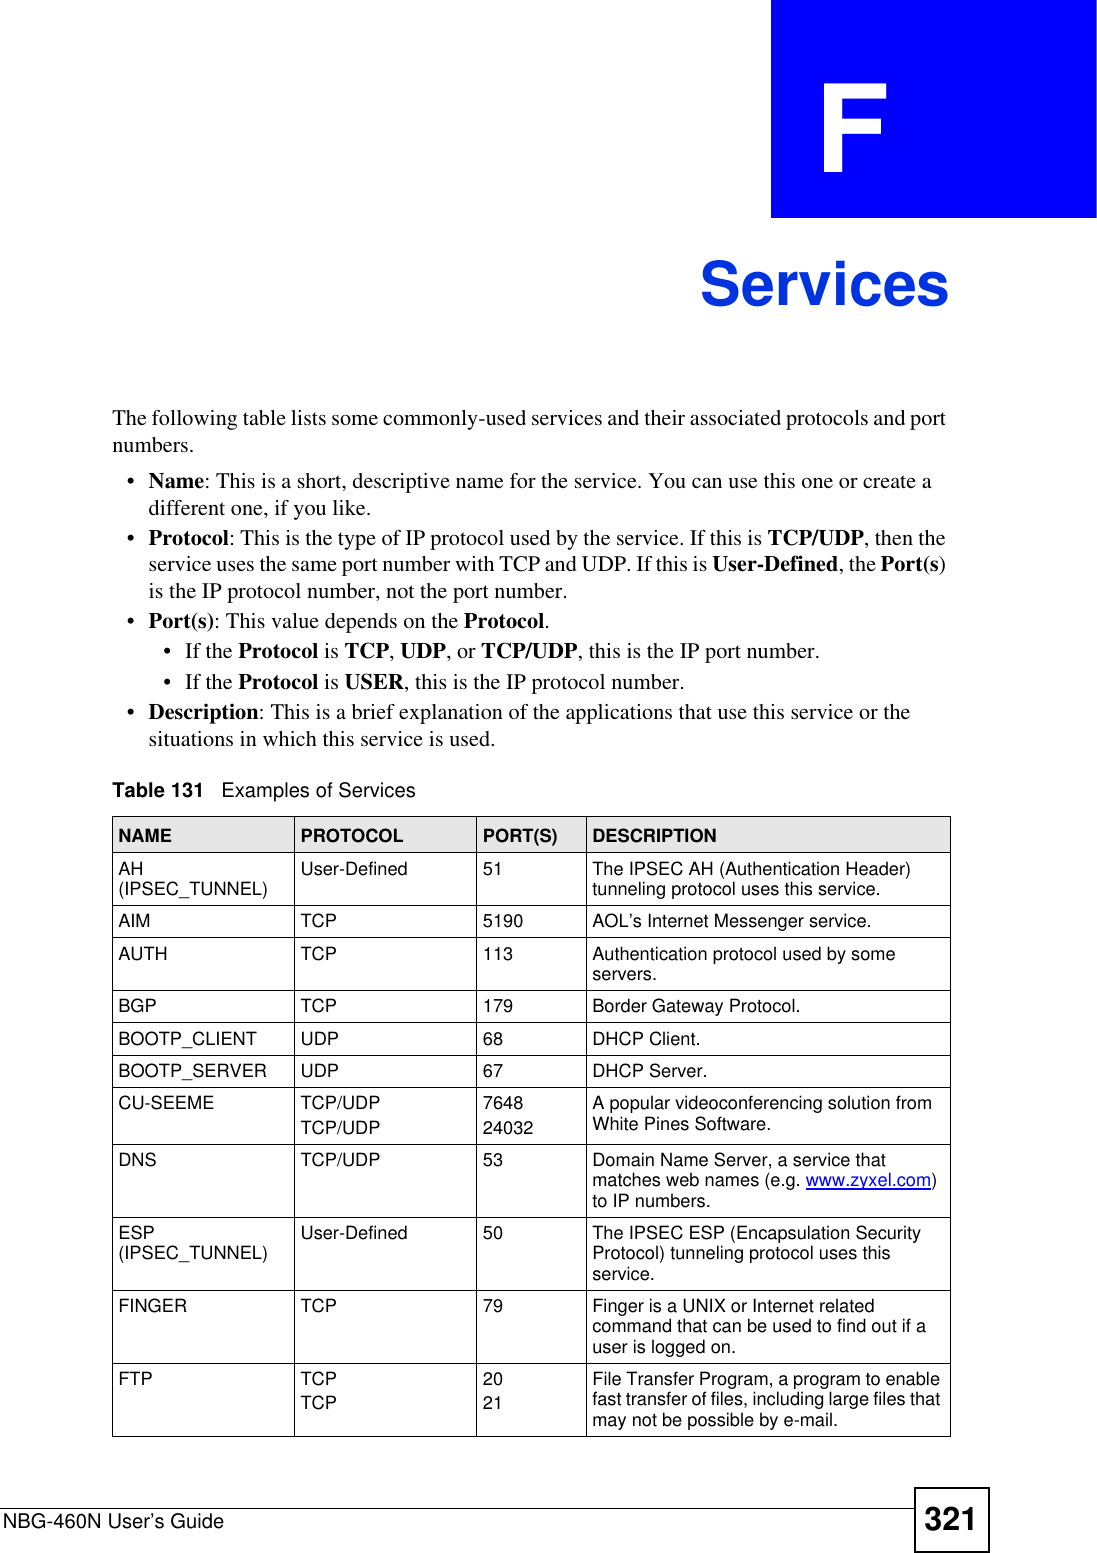 NBG-460N User’s Guide 321APPENDIX  F ServicesThe following table lists some commonly-used services and their associated protocols and port numbers.•Name: This is a short, descriptive name for the service. You can use this one or create a different one, if you like.•Protocol: This is the type of IP protocol used by the service. If this is TCP/UDP, then the service uses the same port number with TCP and UDP. If this is User-Defined, the Port(s)is the IP protocol number, not the port number.•Port(s): This value depends on the Protocol.• If the Protocol is TCP,UDP, or TCP/UDP, this is the IP port number.• If the Protocol is USER, this is the IP protocol number.•Description: This is a brief explanation of the applications that use this service or the situations in which this service is used.Table 131   Examples of ServicesNAME PROTOCOL PORT(S) DESCRIPTIONAH(IPSEC_TUNNEL) User-Defined 51 The IPSEC AH (Authentication Header) tunneling protocol uses this service.AIM TCP 5190 AOL’s Internet Messenger service.AUTH TCP 113 Authentication protocol used by some servers.BGP TCP 179 Border Gateway Protocol.BOOTP_CLIENT UDP 68 DHCP Client.BOOTP_SERVER UDP 67 DHCP Server.CU-SEEME TCP/UDPTCP/UDP 764824032A popular videoconferencing solution from White Pines Software.DNS TCP/UDP 53 Domain Name Server, a service that matches web names (e.g. www.zyxel.com)to IP numbers.ESP(IPSEC_TUNNEL) User-Defined 50 The IPSEC ESP (Encapsulation Security Protocol) tunneling protocol uses this service.FINGER TCP 79 Finger is a UNIX or Internet related command that can be used to find out if a user is logged on.FTP TCPTCP2021File Transfer Program, a program to enable fast transfer of files, including large files that may not be possible by e-mail.